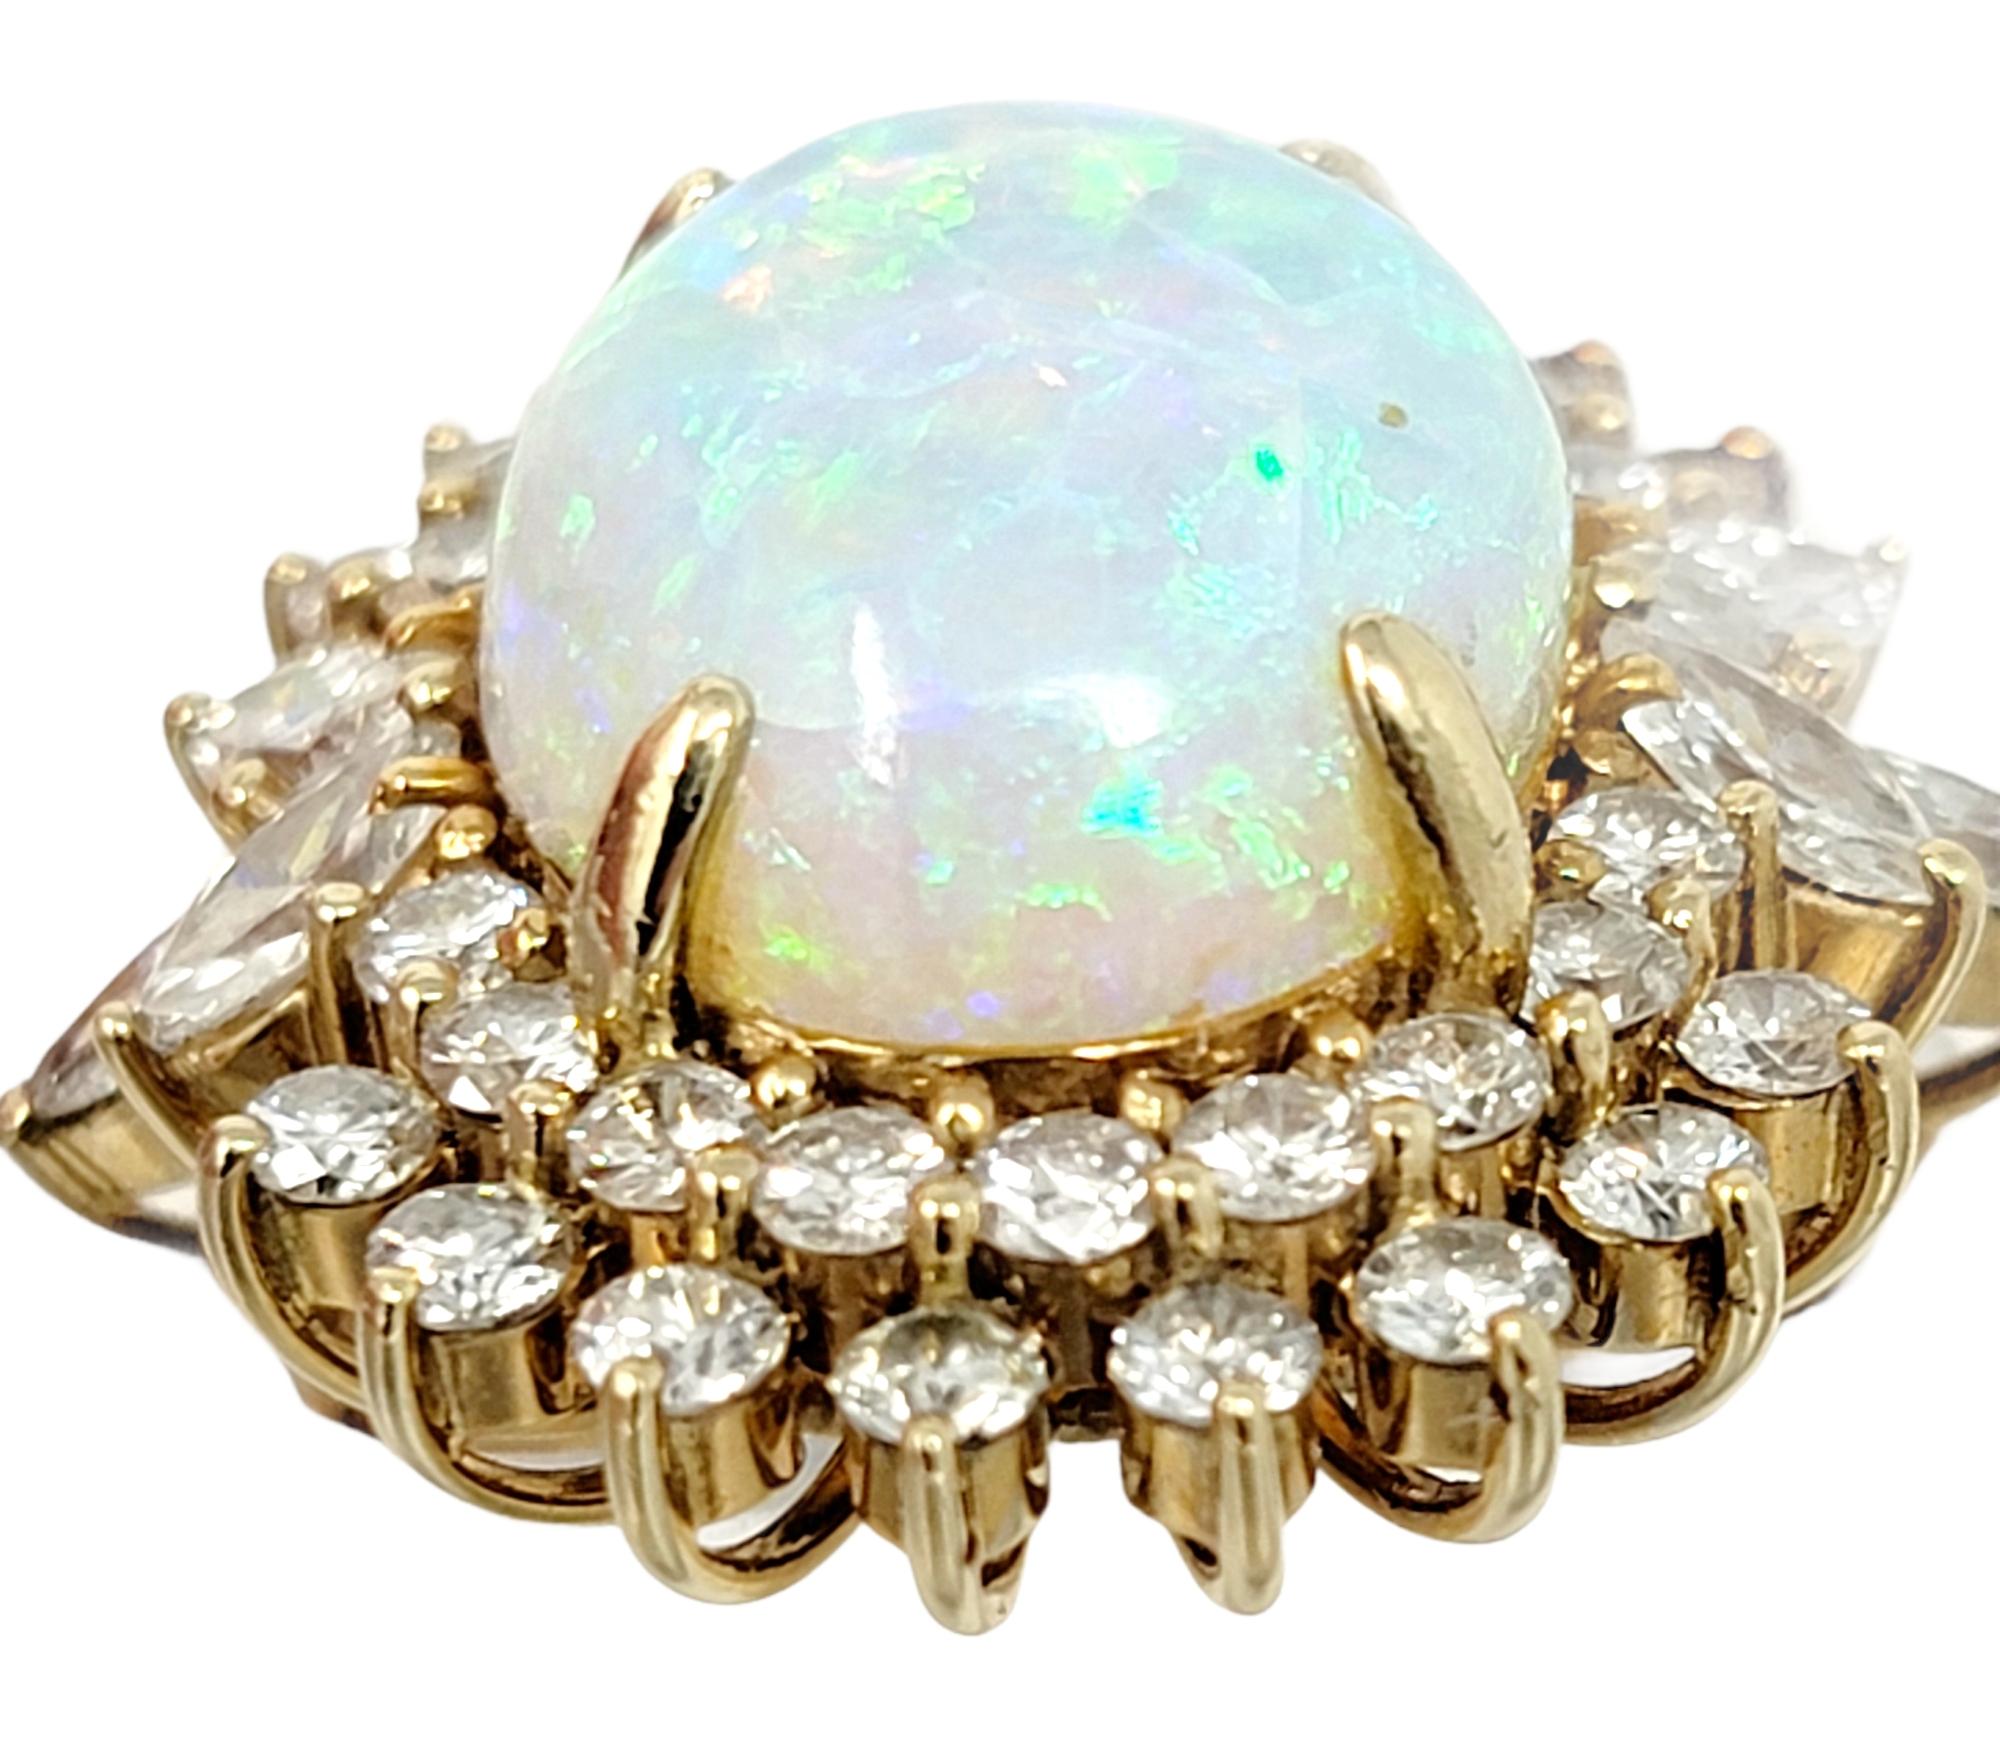 Women's 7.55 Carats Total Opal Cabochon and Diamond Halo Ring in 14 Karat Yellow Gold For Sale